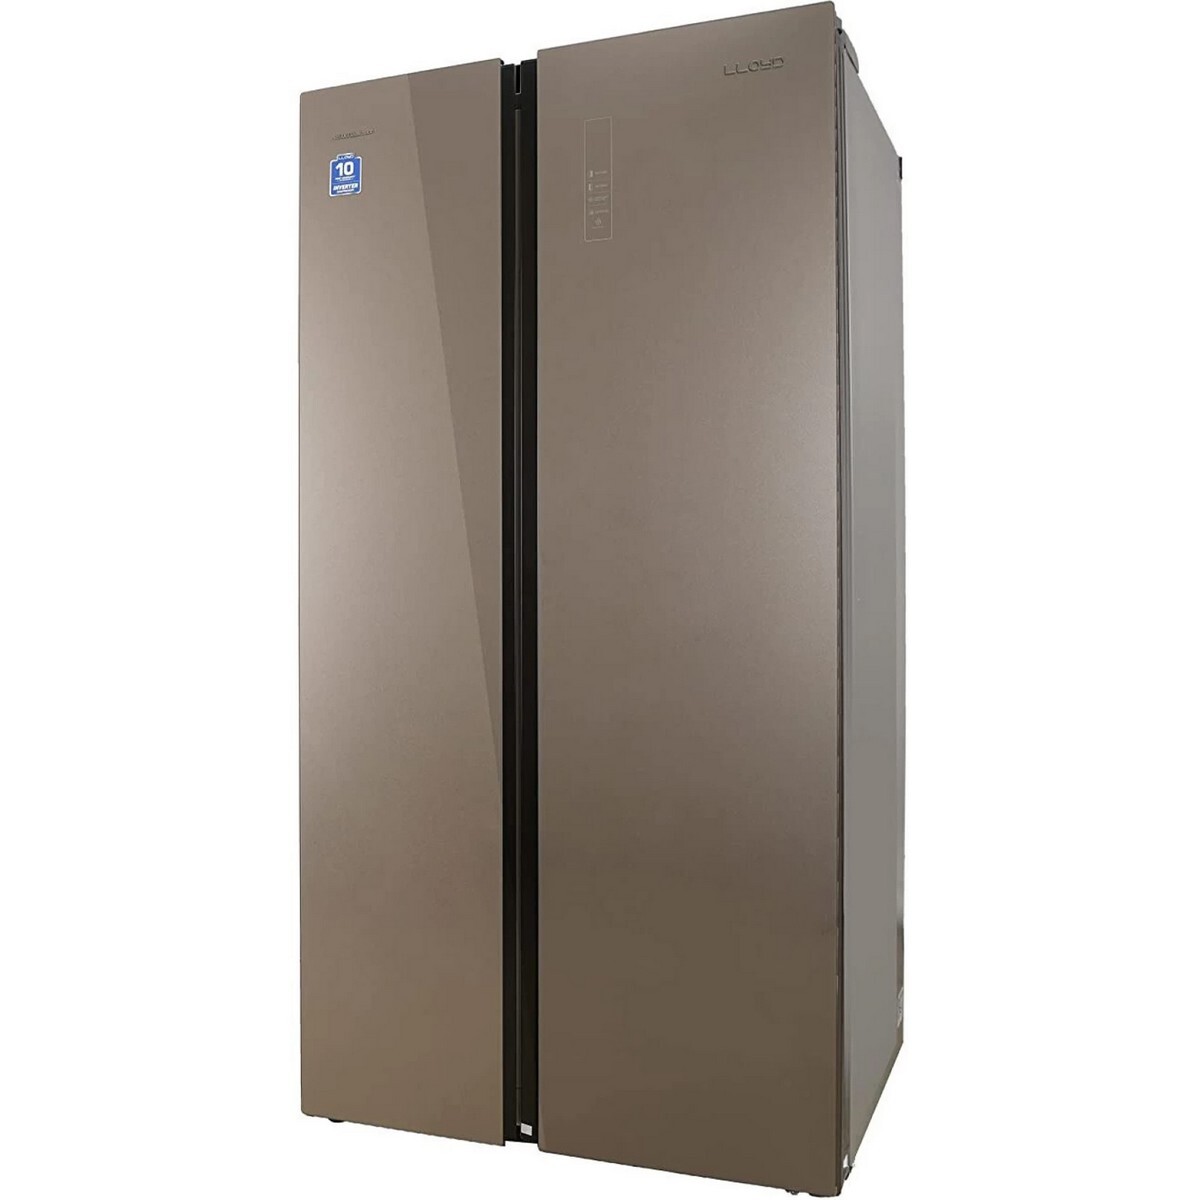 Lloyd Frost Free Side by Side Refrigerator GLSF590DGGT1GB 587 Ltr Graphite